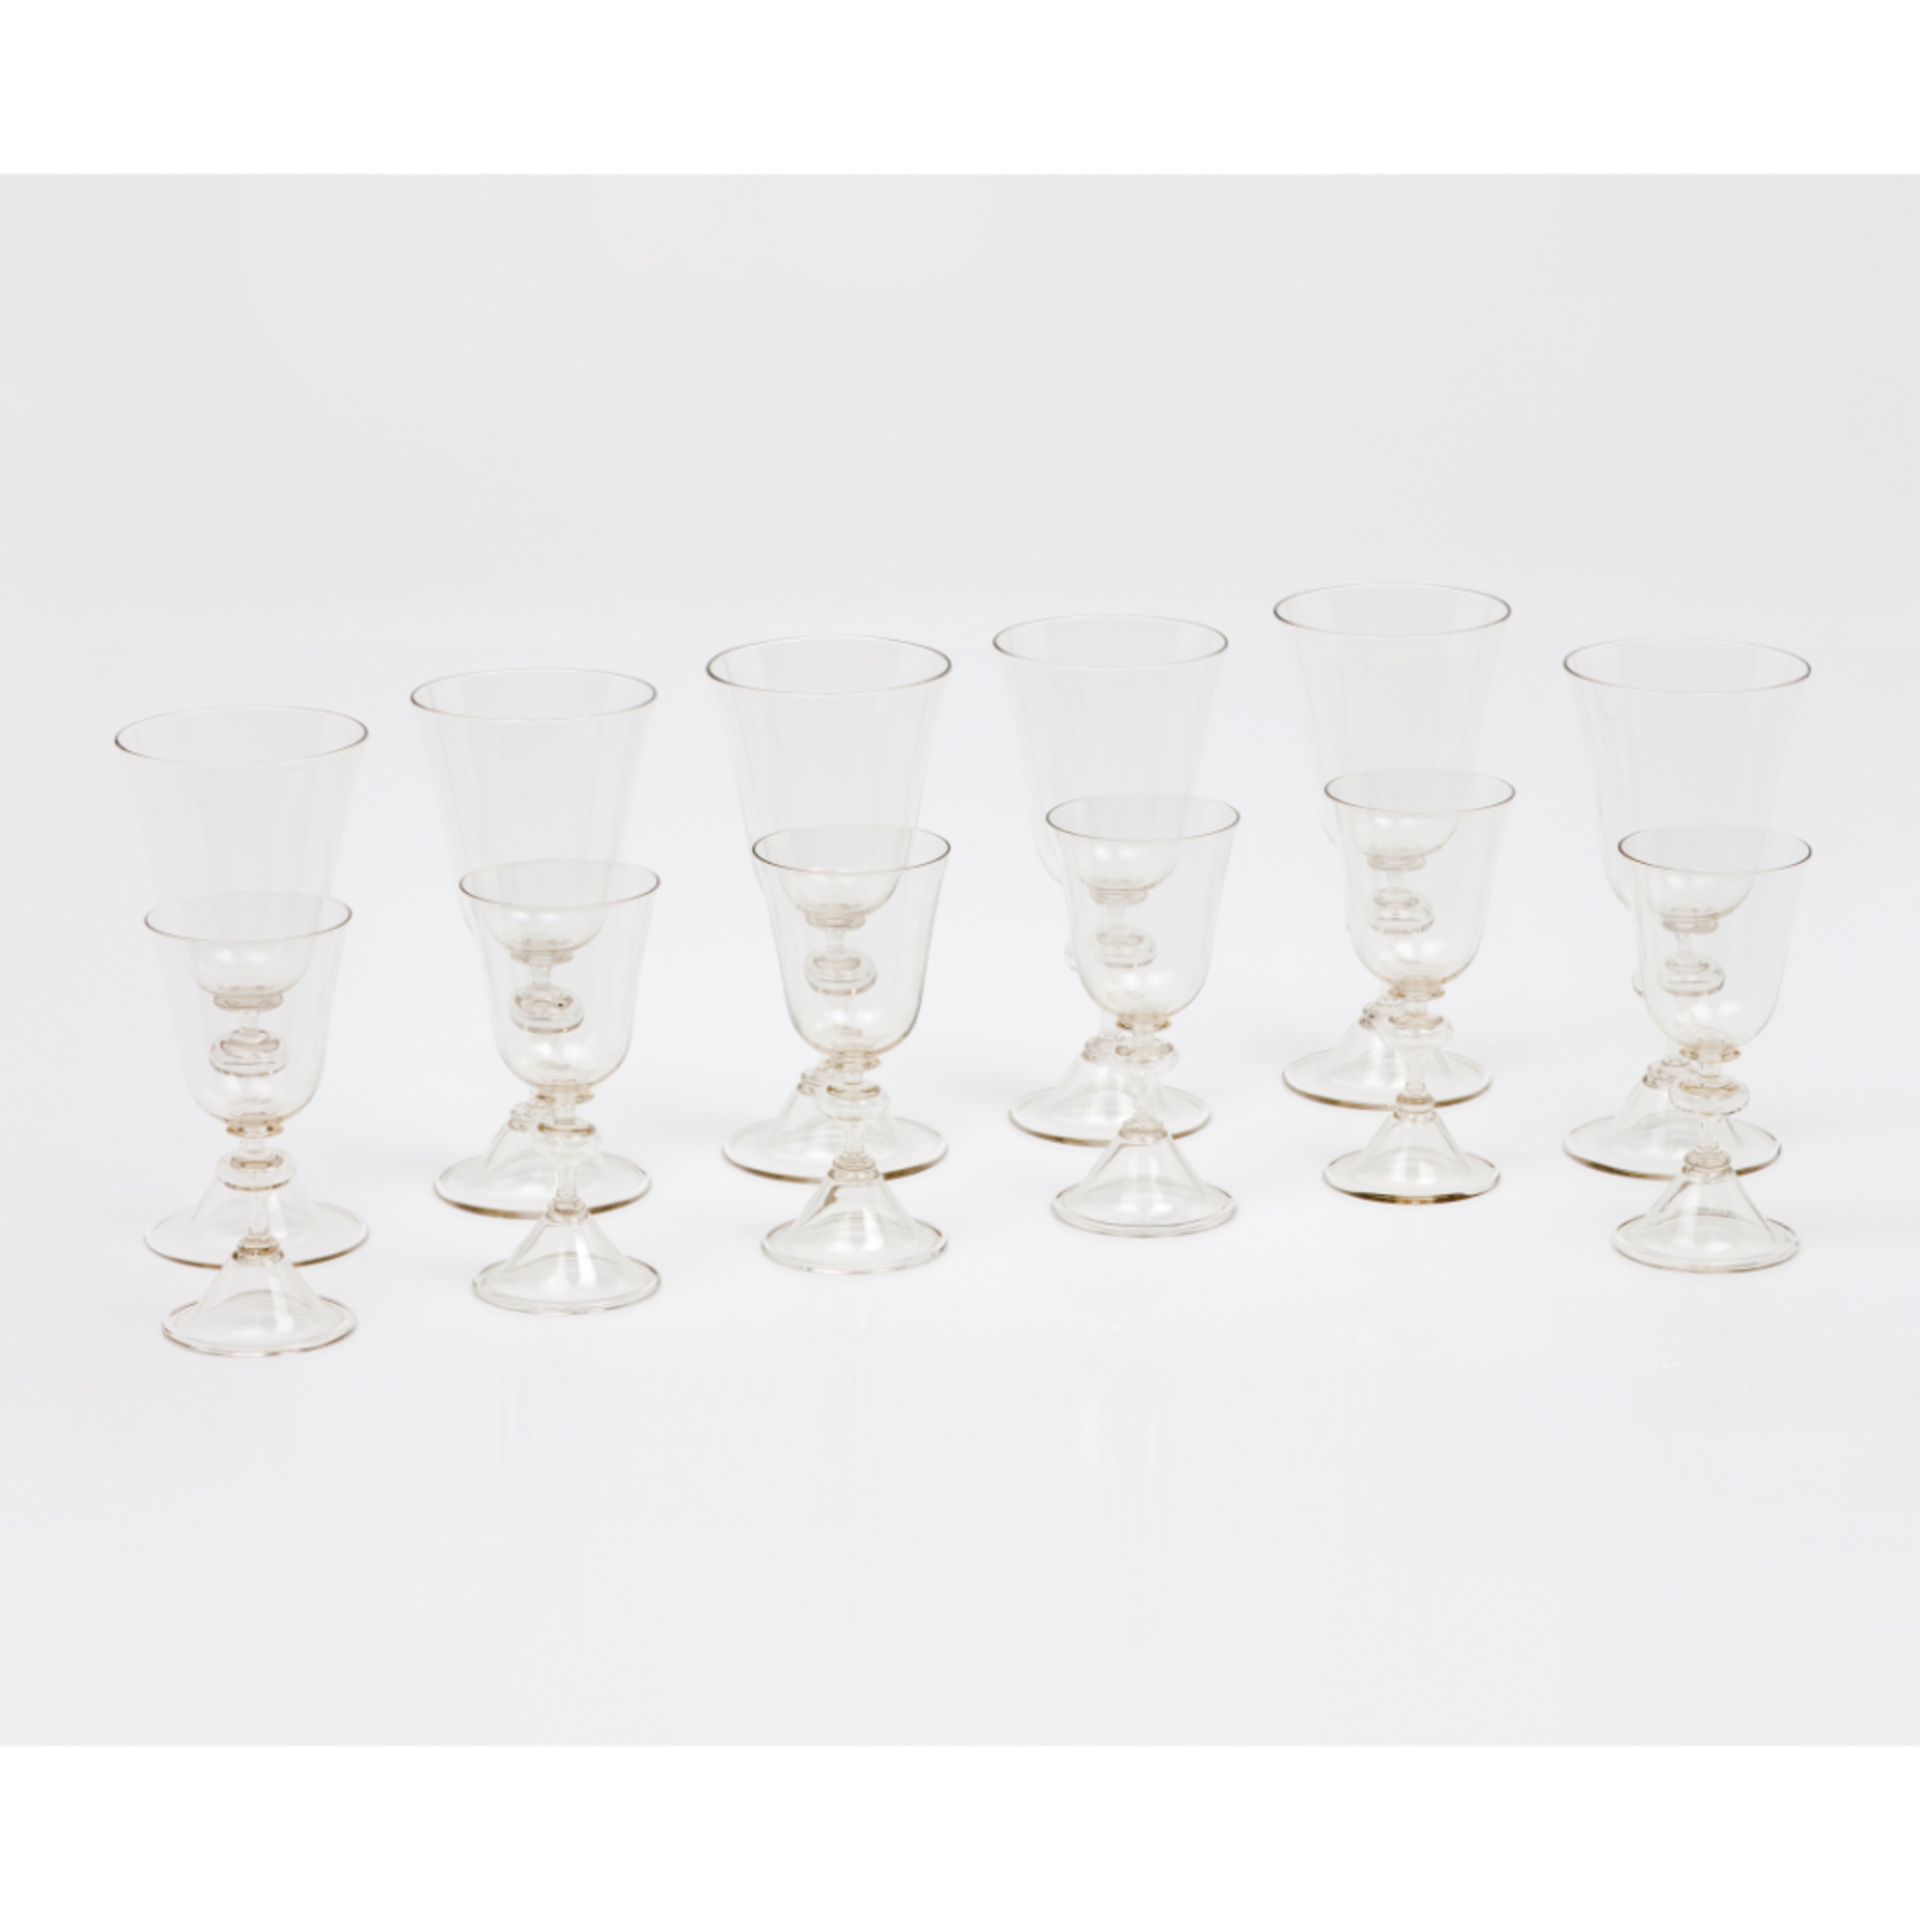 A set of 6 red wine glasses